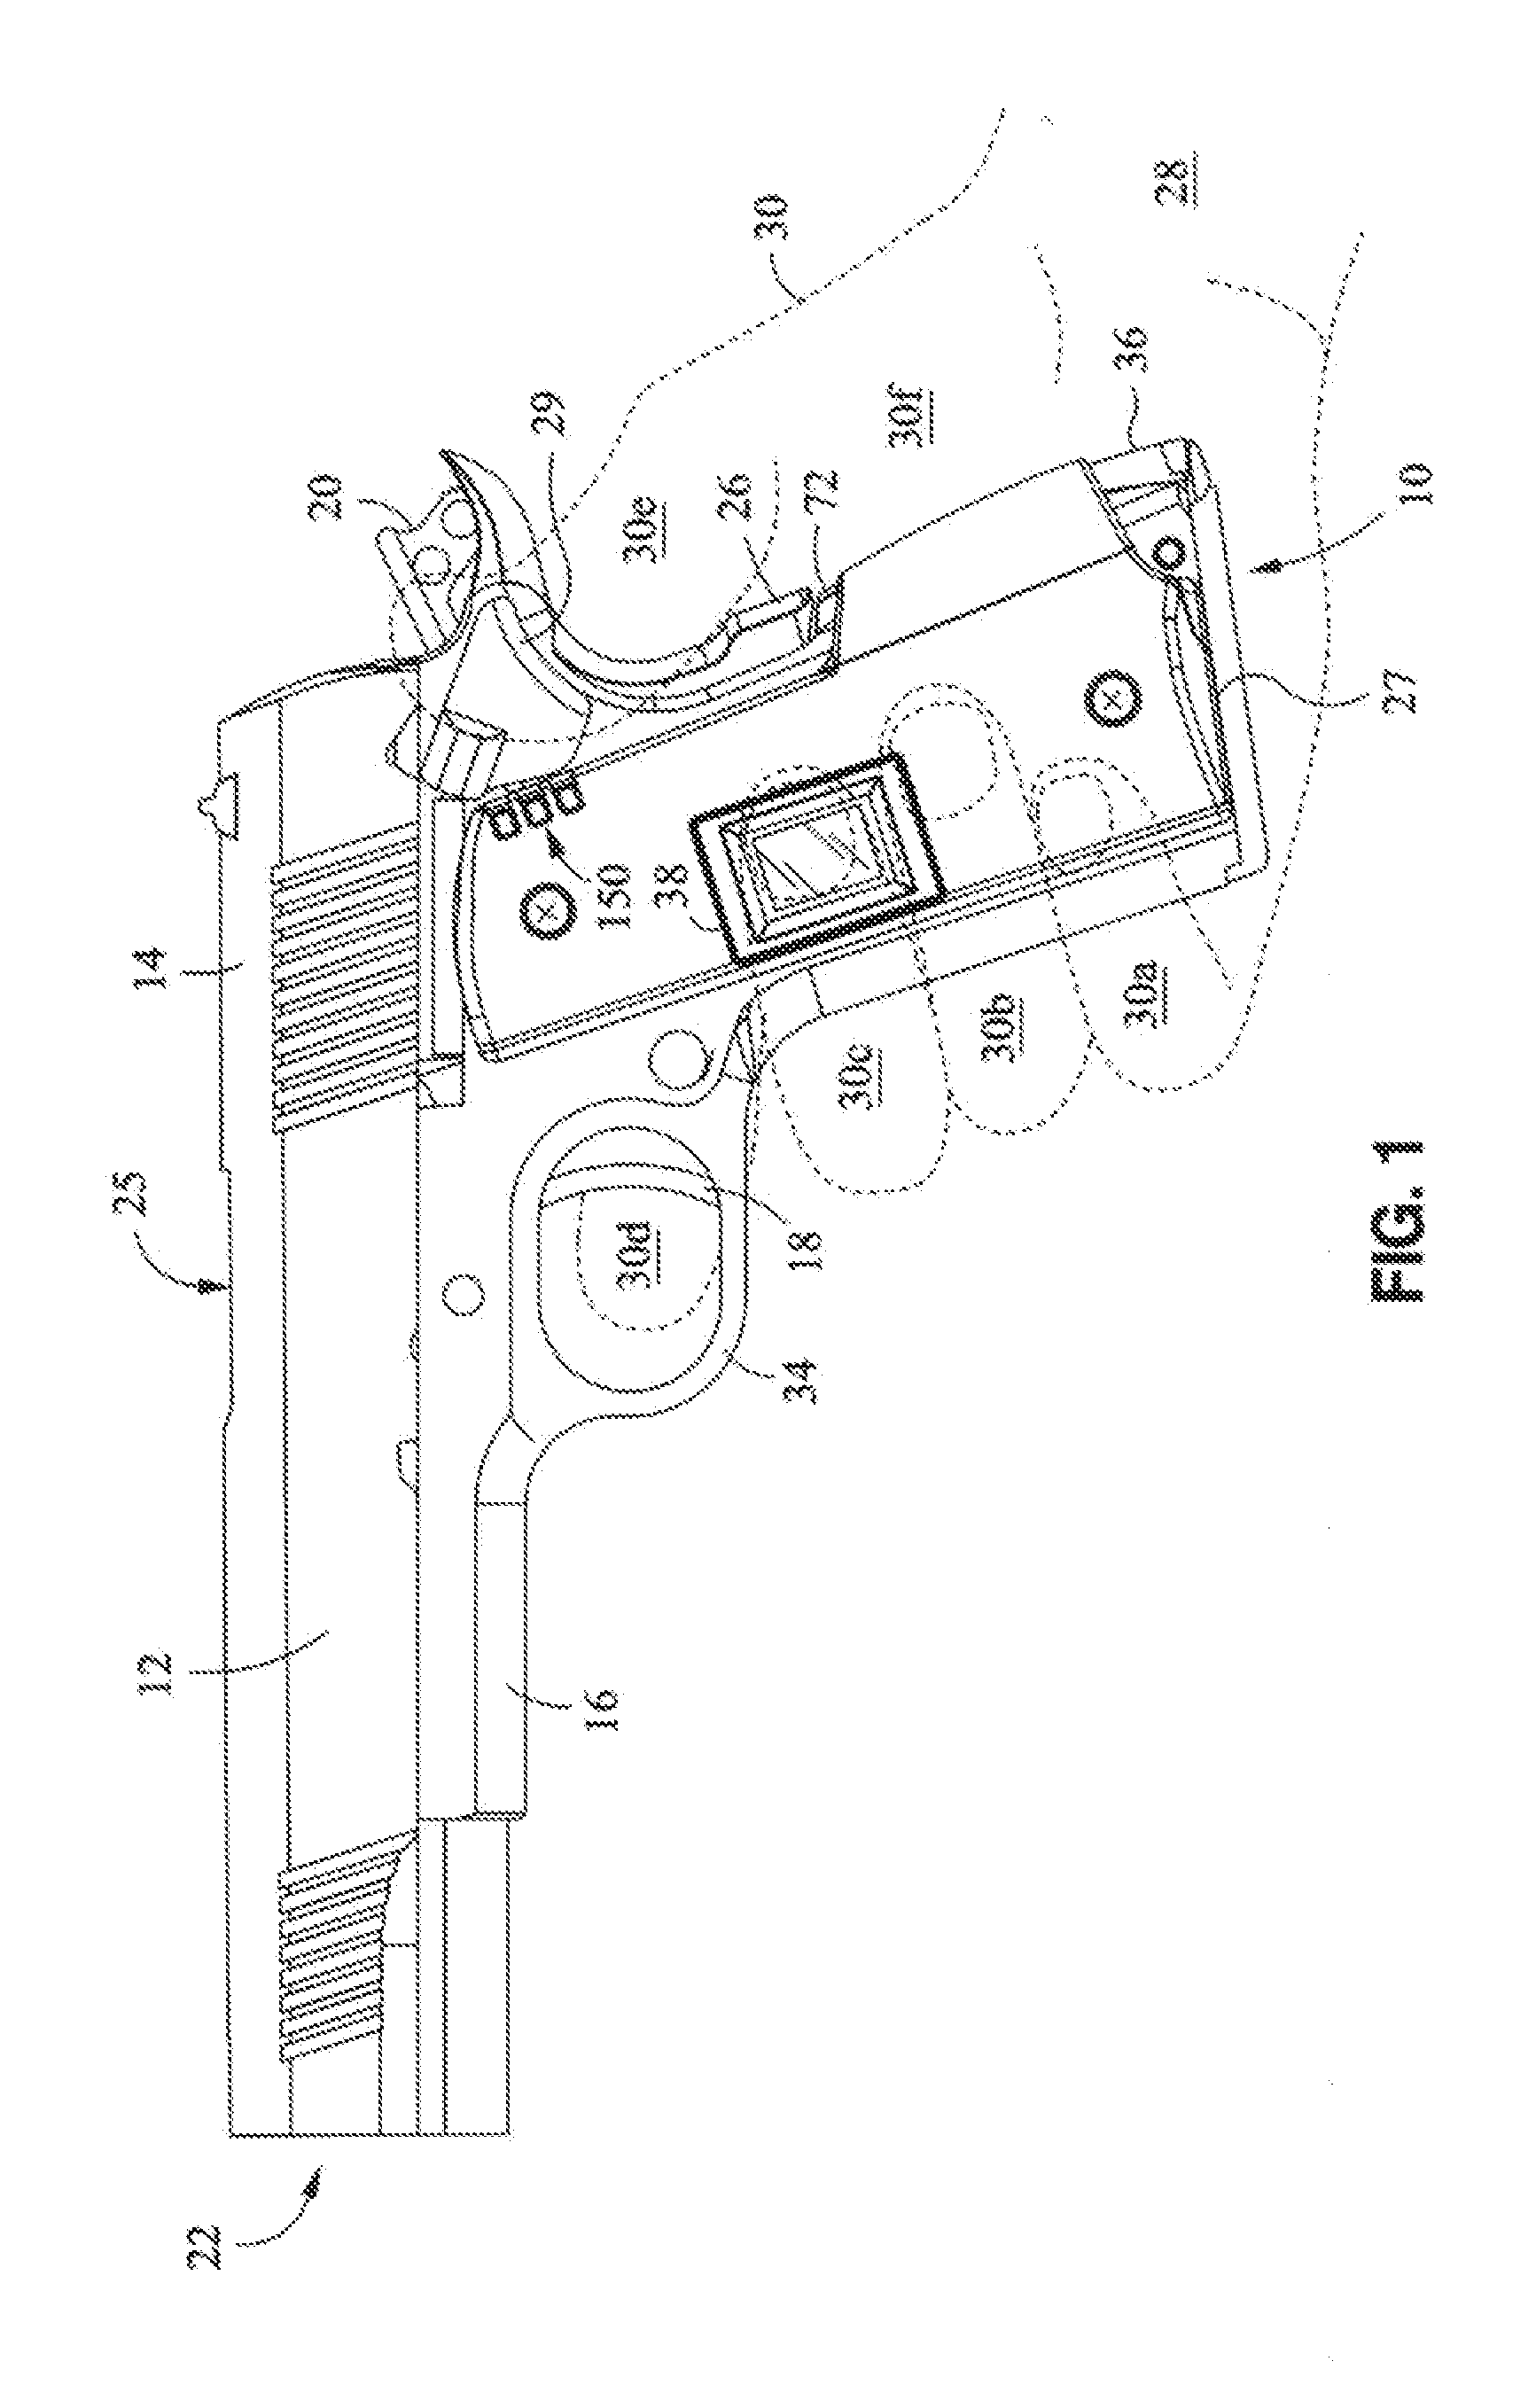 Firearm safety lock with key-based override